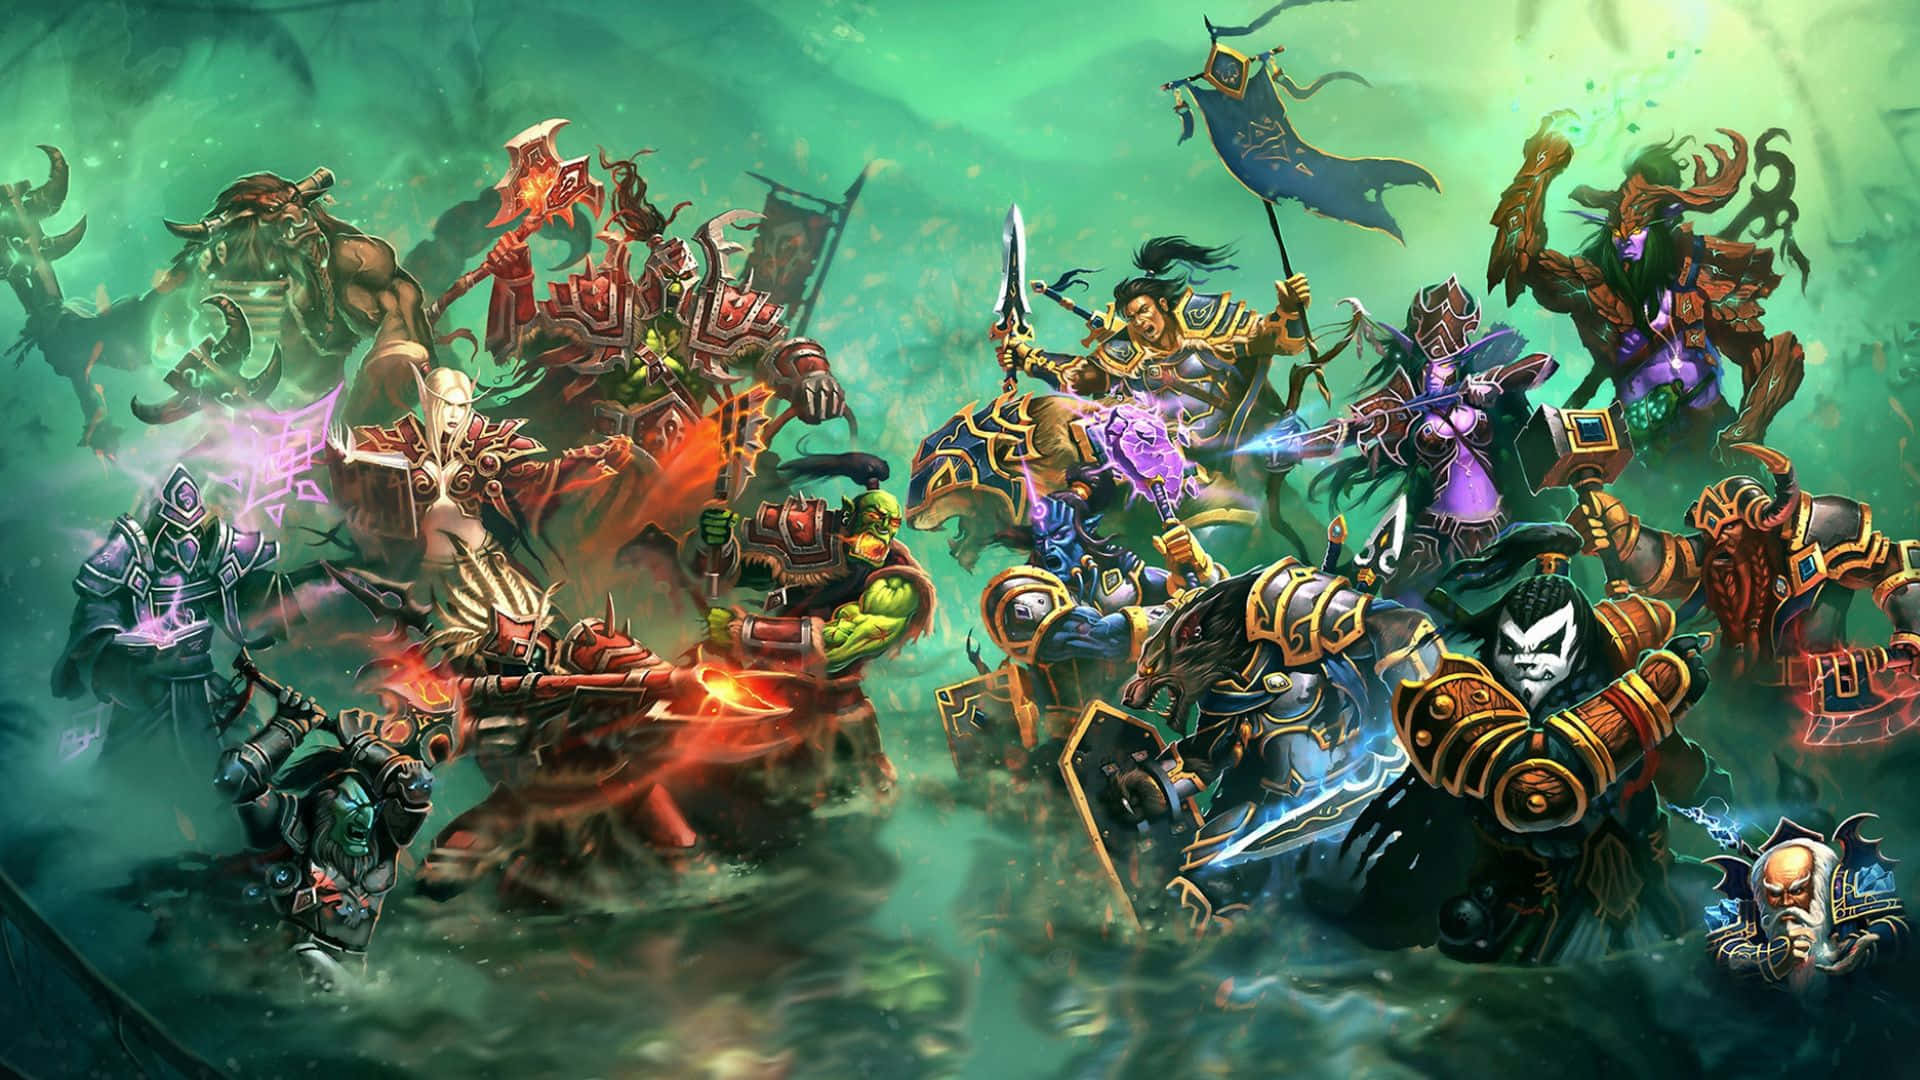 Stunning World of Warcraft Races In Action Wallpaper